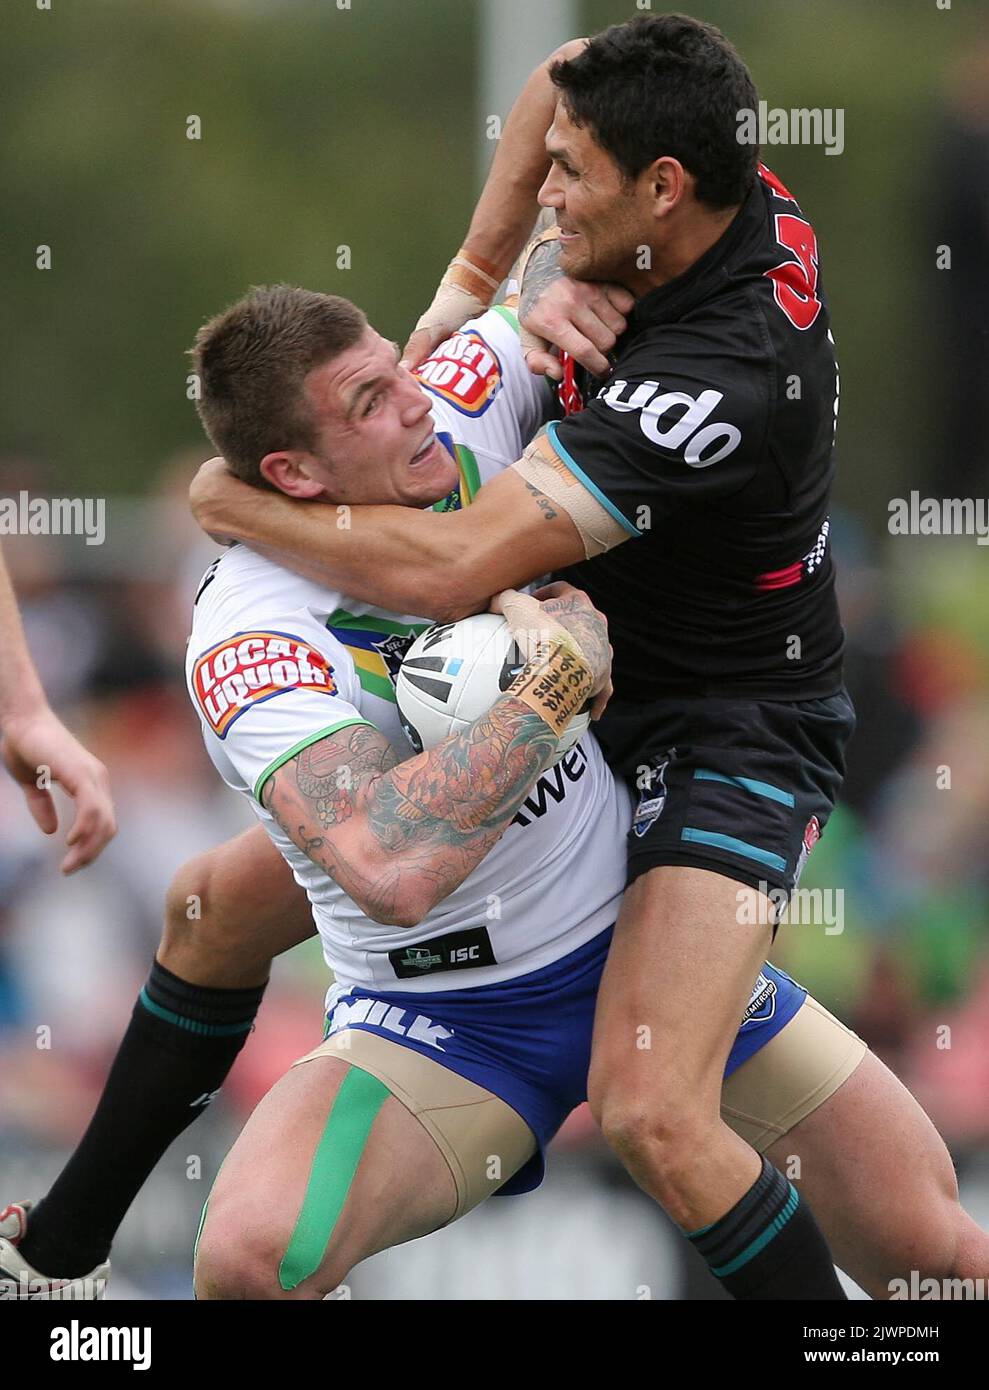 Josh Dugan tackled by Brad Tighe during the National Rugby League Round 23 match between Penrith Panthers V Canberra Raiders at the Centrebet Stadium on Sunday Aug 12th 2012